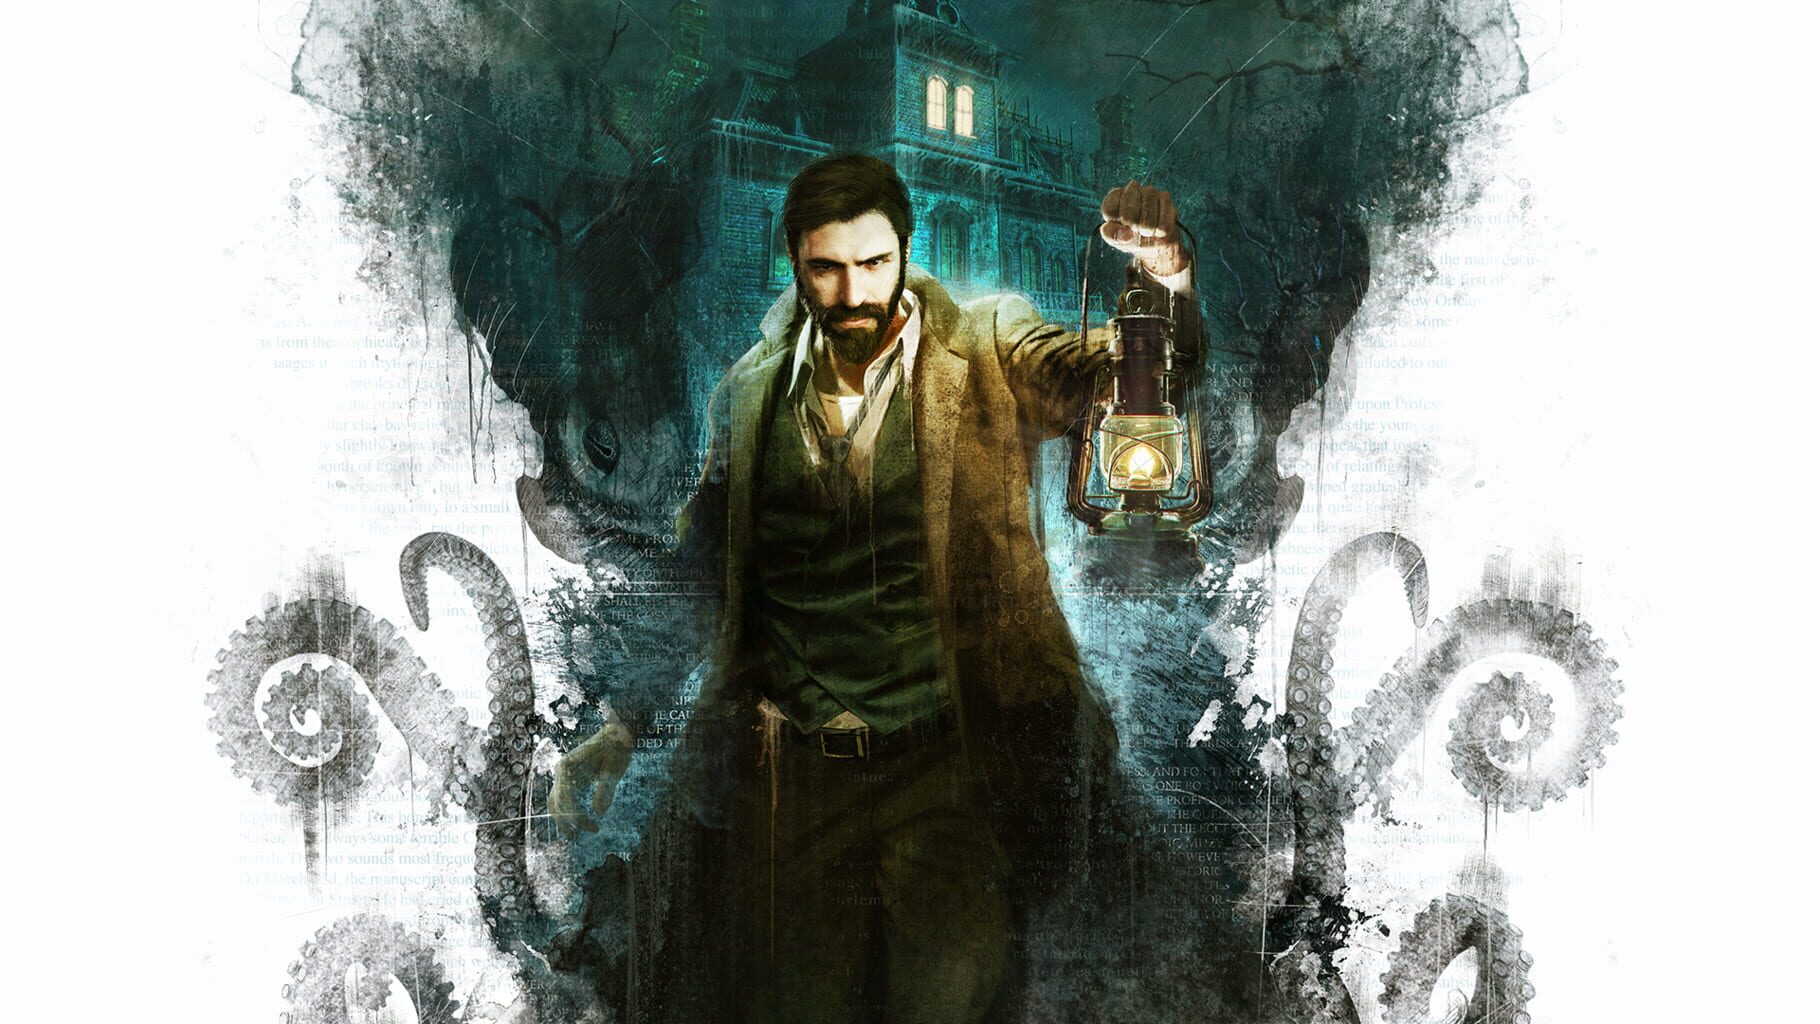 Artwork for Call of Cthulhu